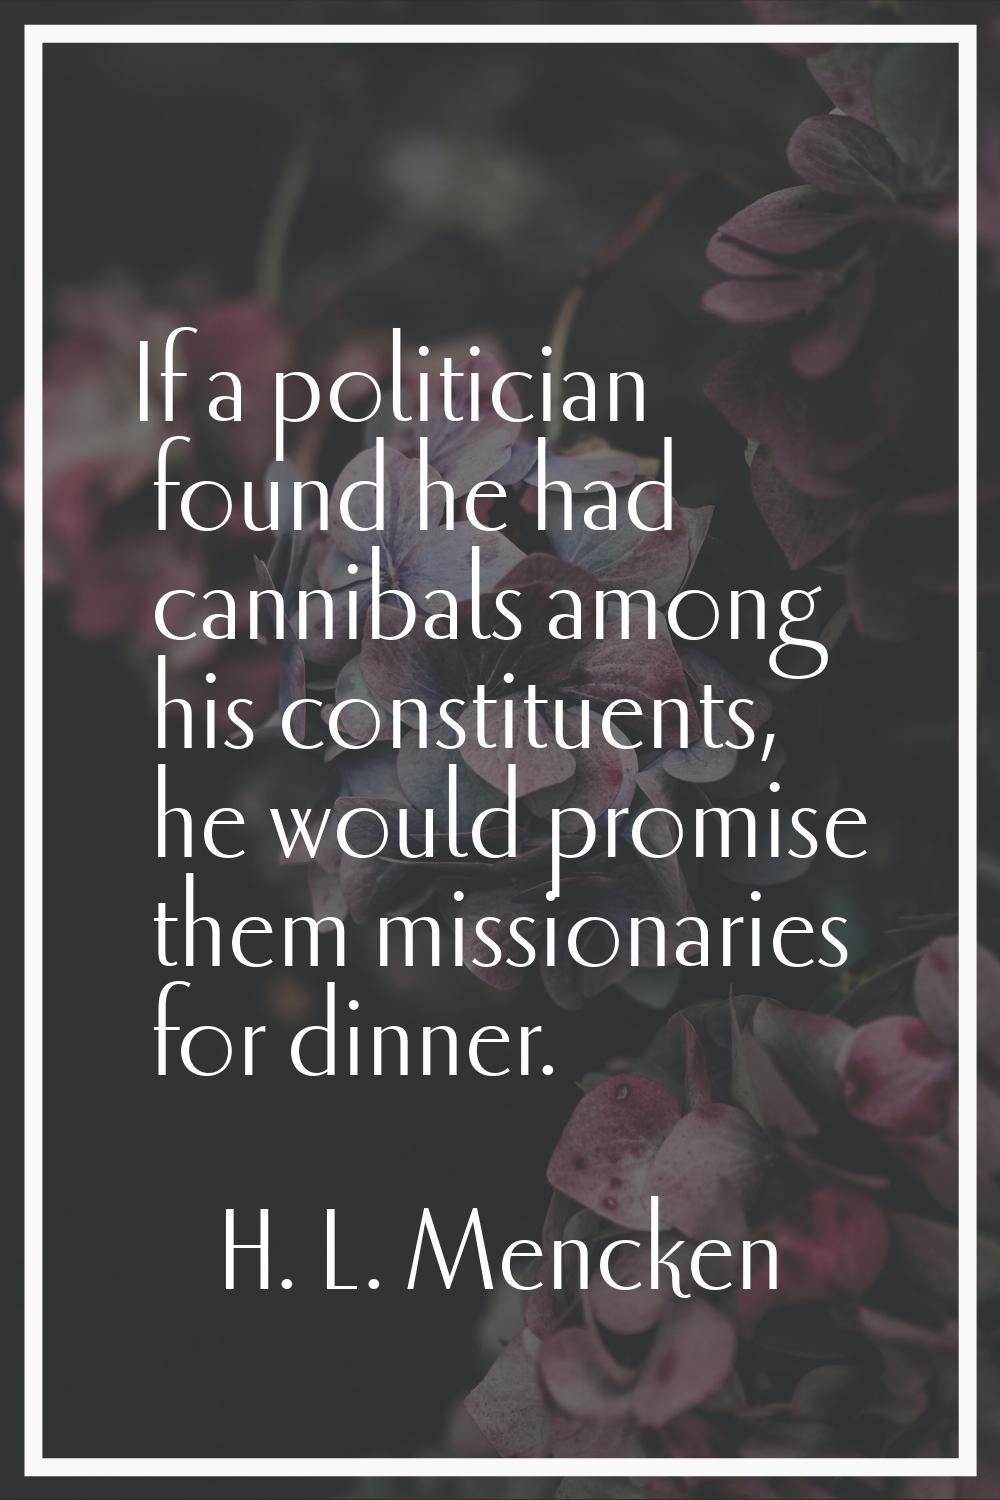 If a politician found he had cannibals among his constituents, he would promise them missionaries f